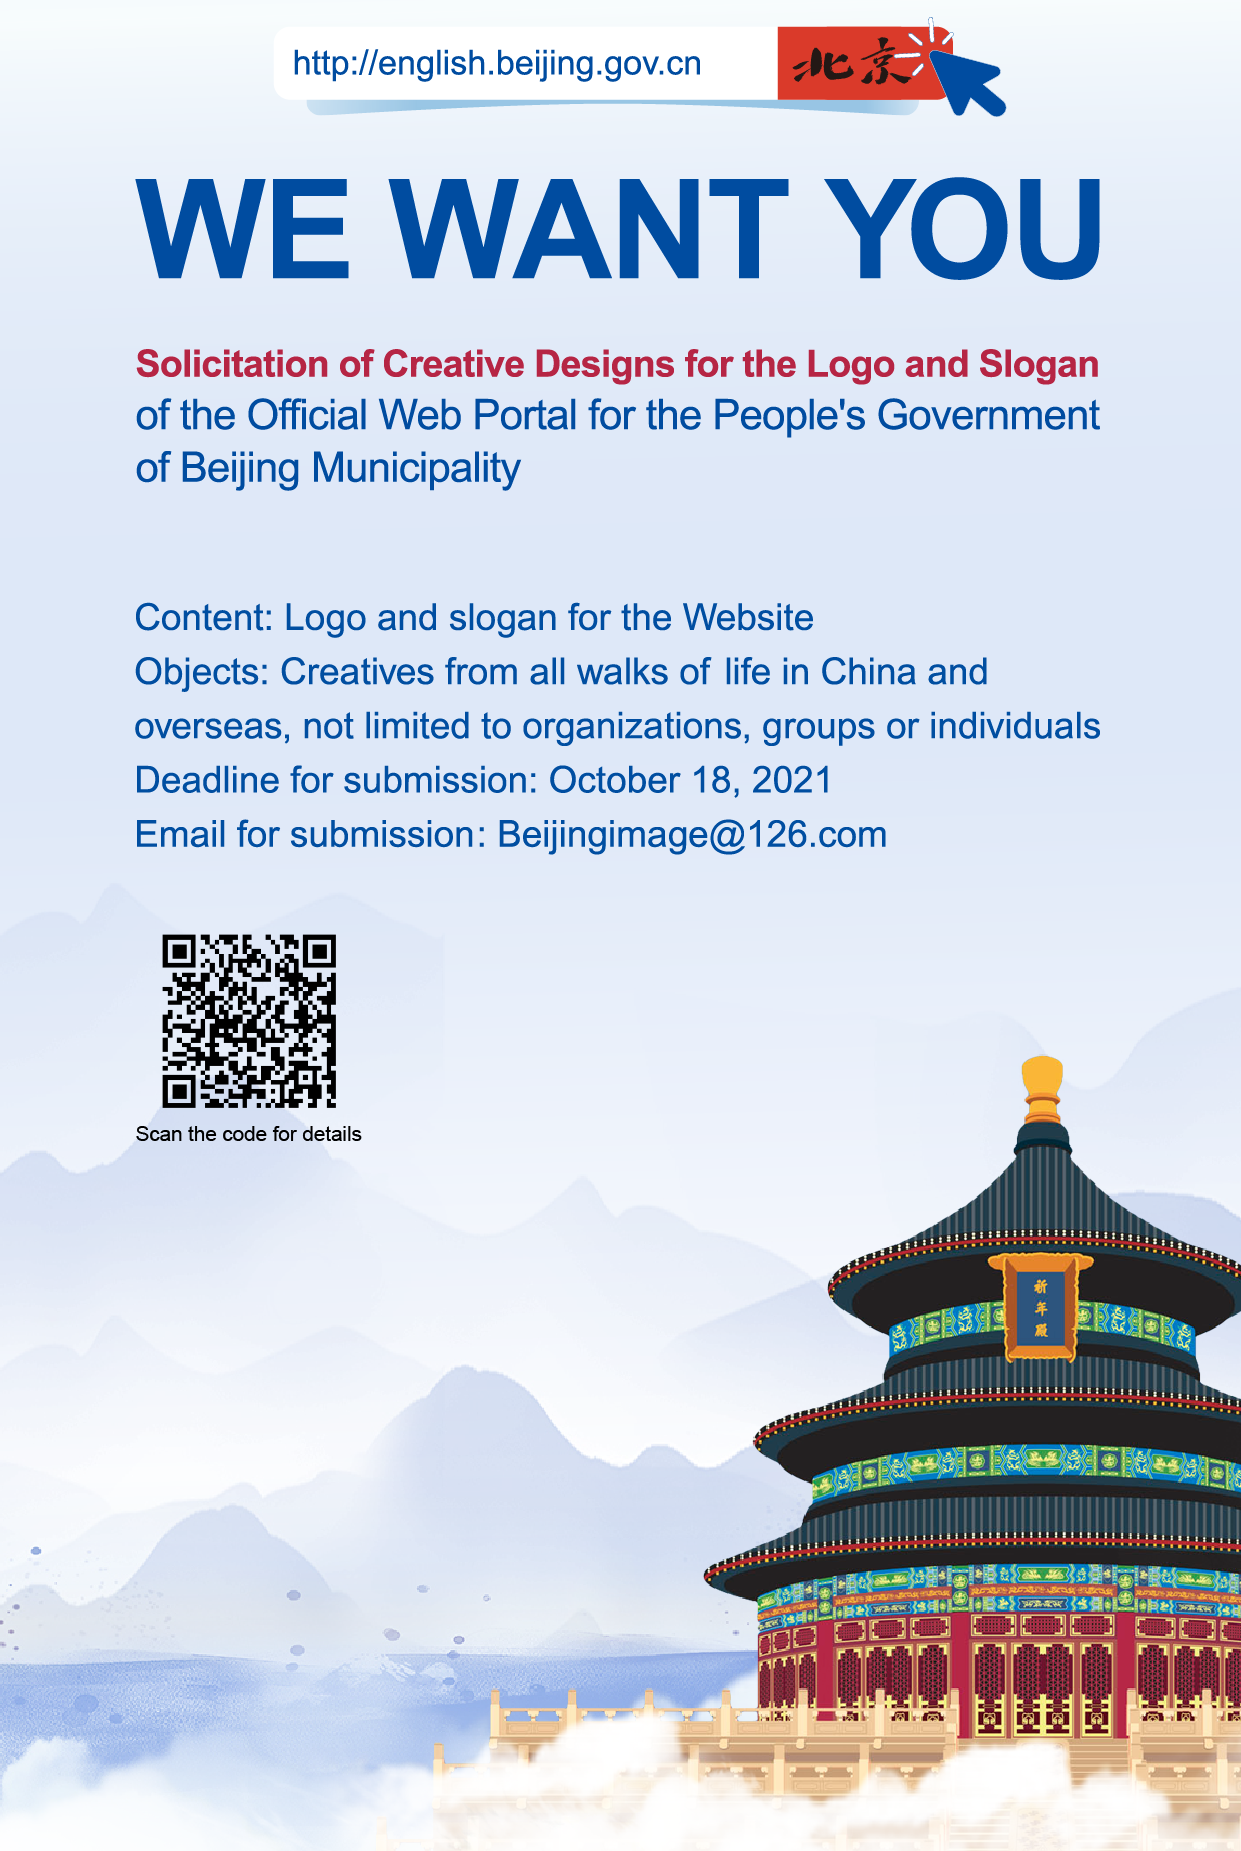 Call for Creative Logo Design and Slogan Ideas for the Official Web Portal for People's Government of Beijing Municipality Launched